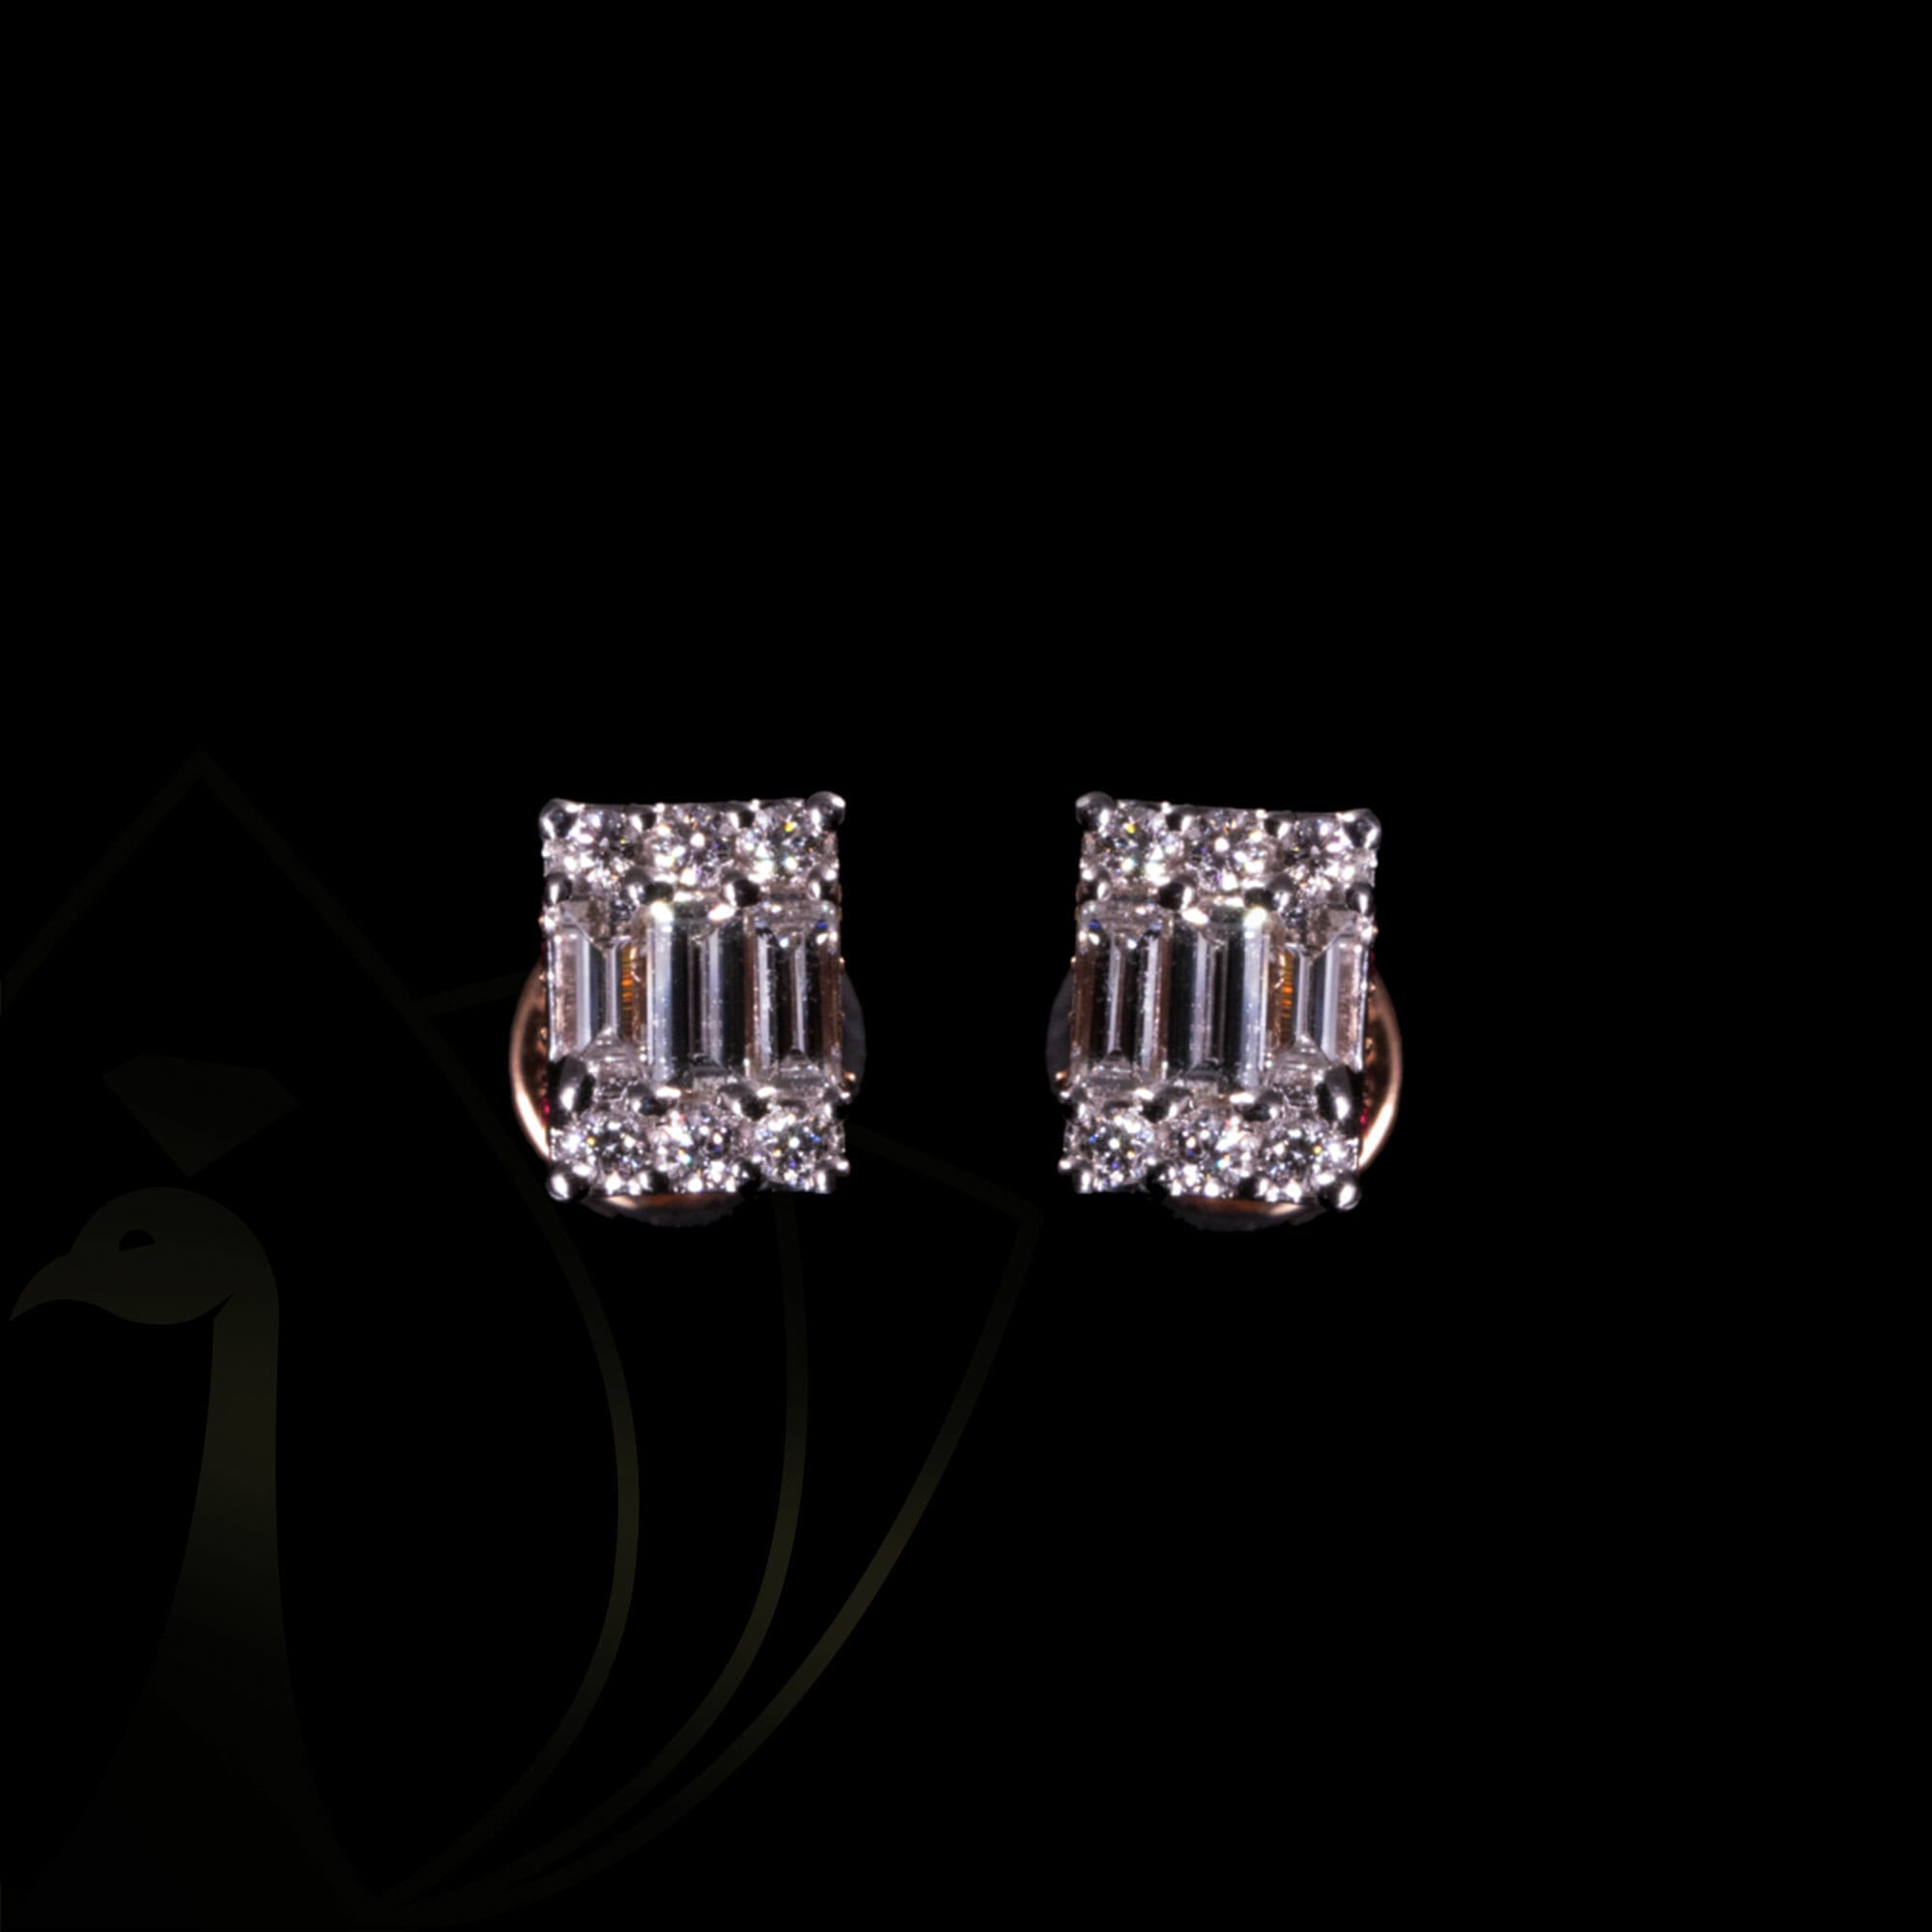 Imperial Empress Diamond Earrings from our exclusive Gulz Collection